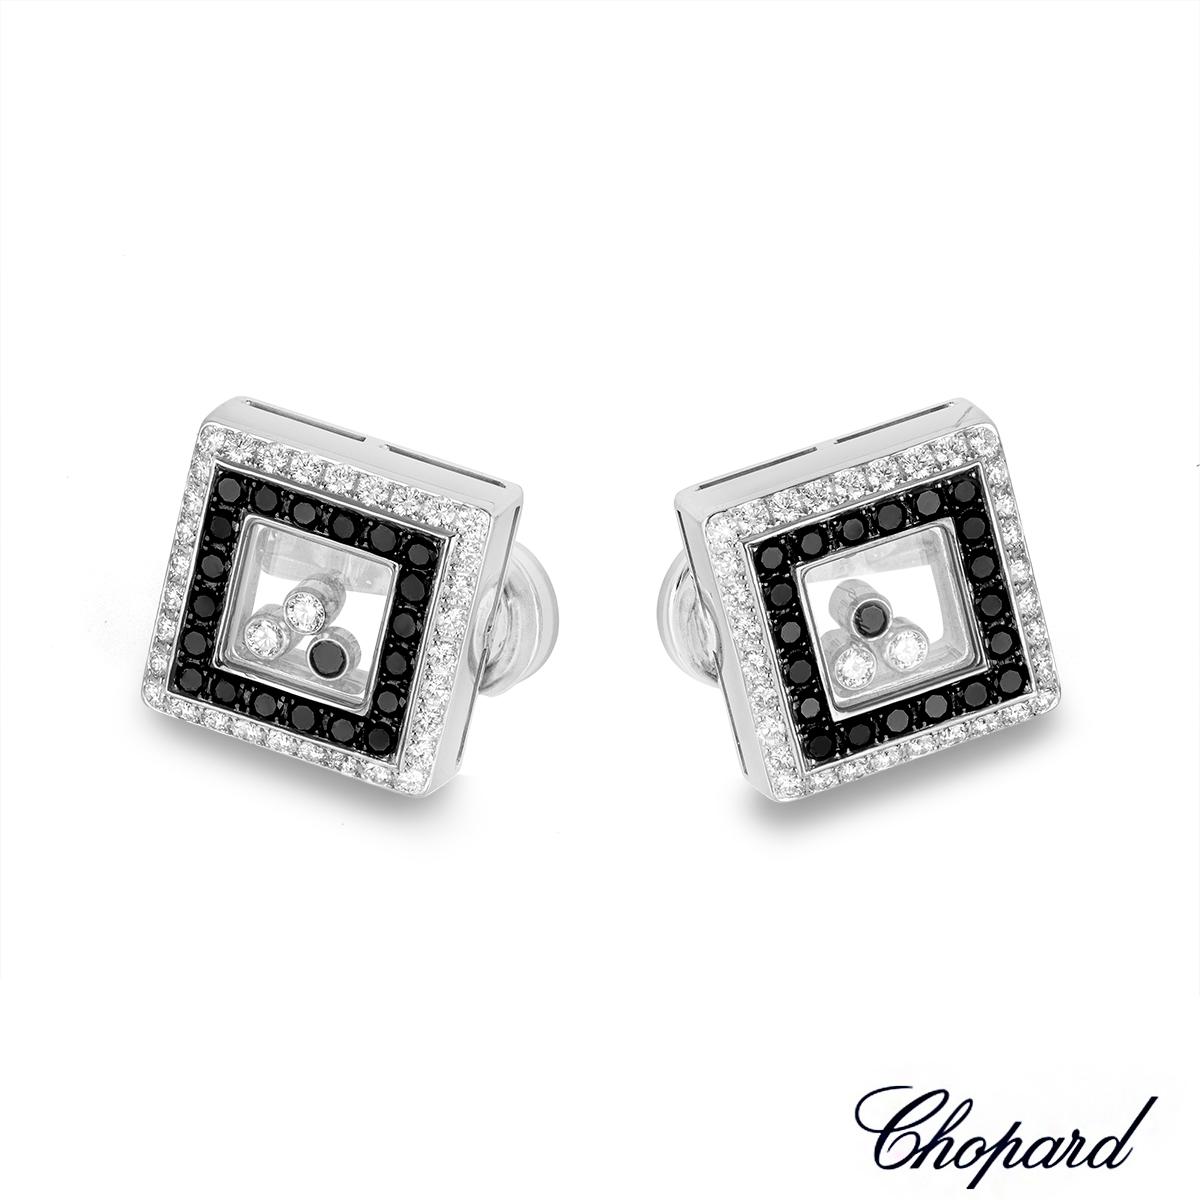 Chopard White Gold Happy Diamonds Earrings 84/3684-1001 In New Condition For Sale In London, GB